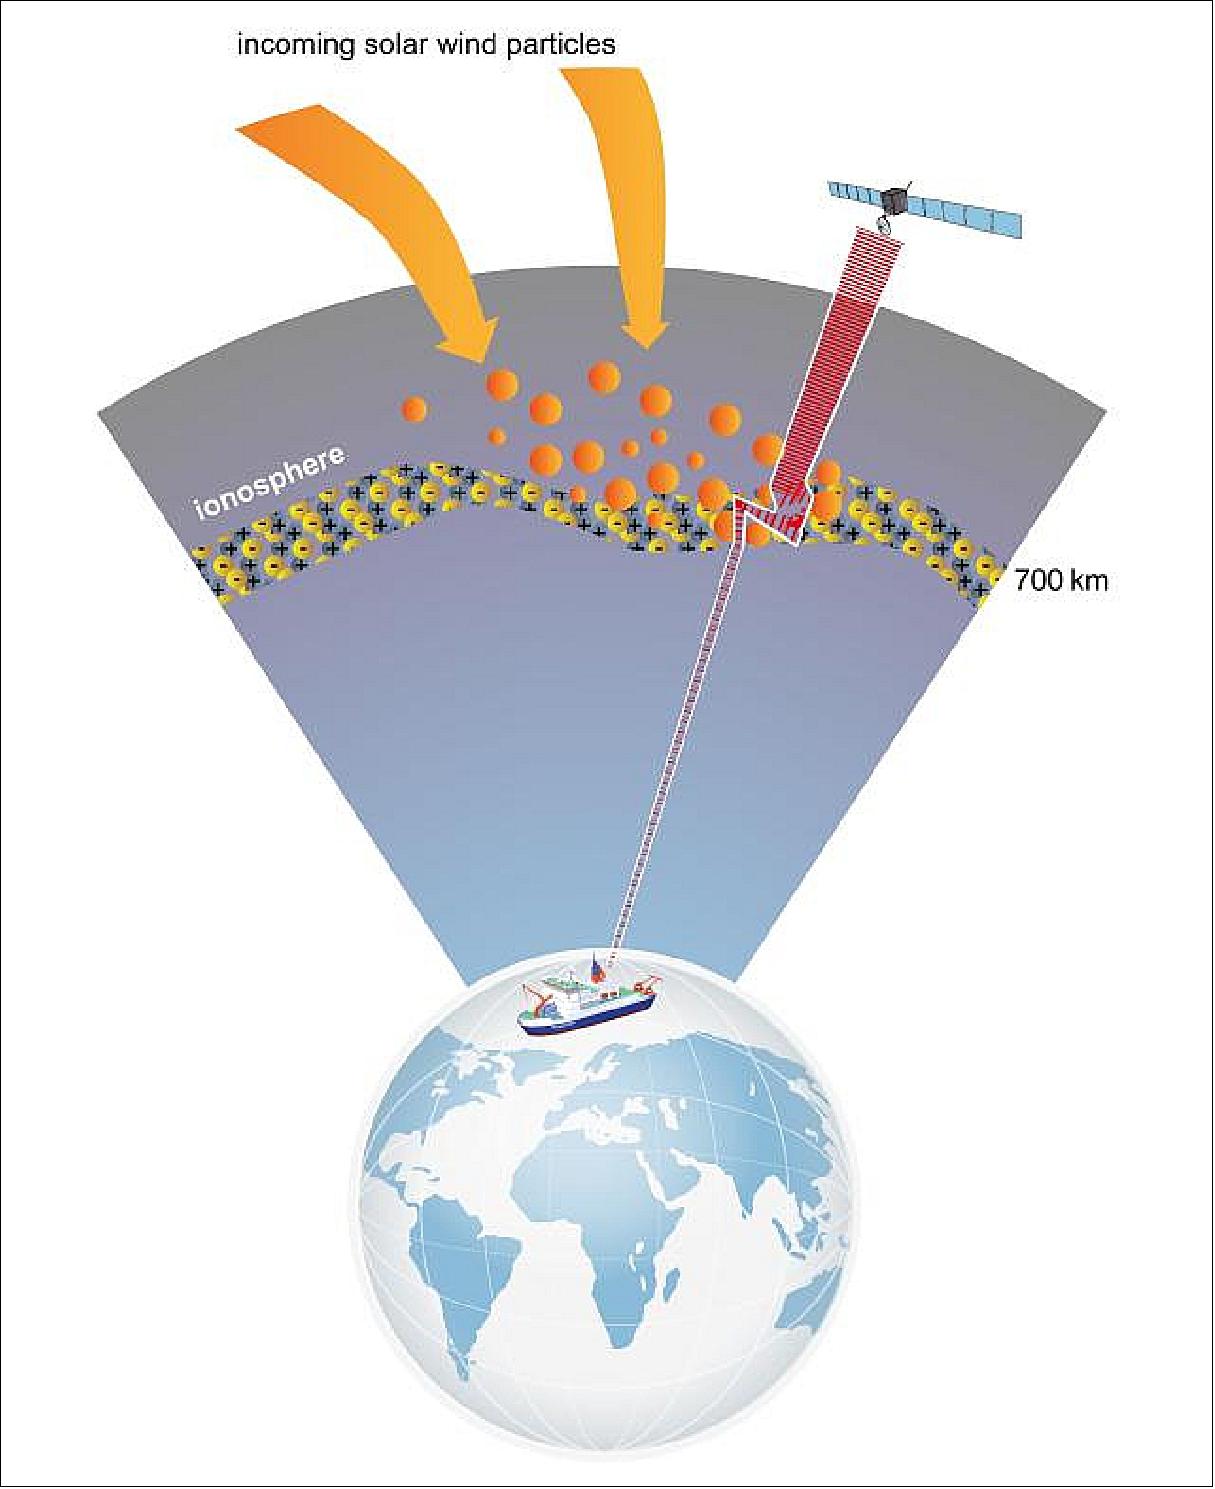 Figure 6: Infographic: Charged particles from the Sun interact with Earth’s atmosphere and cause scintillations in the ionosphere. This interferes with radio signals on their way from satellites to the planet’s surface. Navigation signals in particular can be influenced to such an extent that precise positioning is sometimes no longer possible. In order to develop effective countermeasures, such as correction algorithms for navigation systems, satellite data from the polar regions are required. These data are currently not available (graphic credit: DLR (CC-BY 3.0))